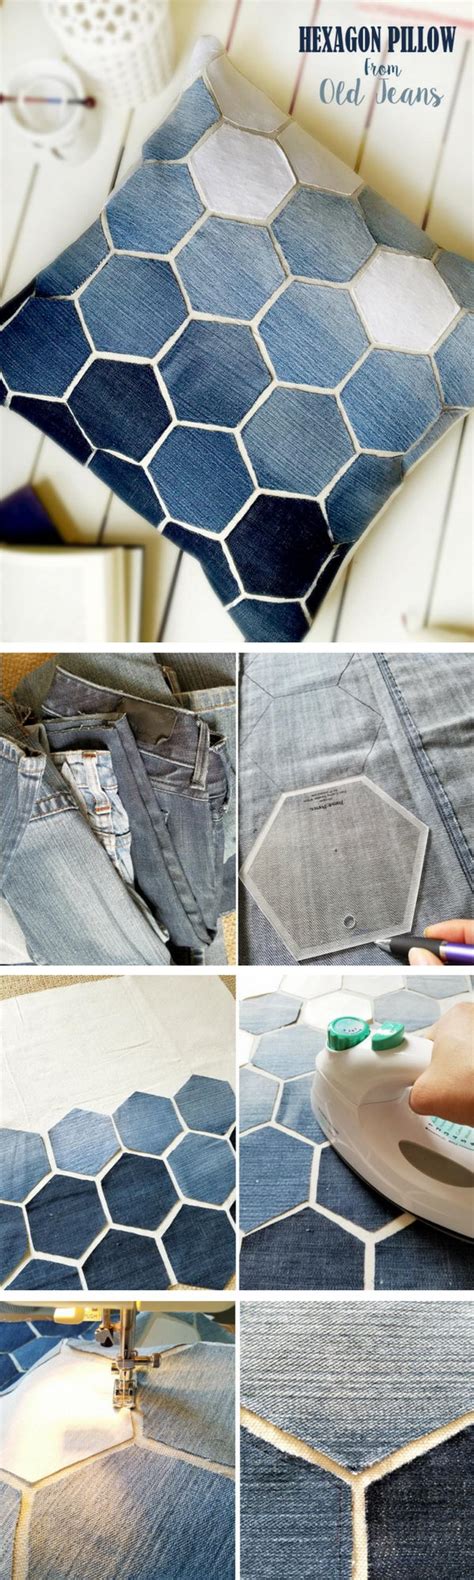 20 Creative Diy Ideas To Repurpose Your Old Jeans Tiger Feng